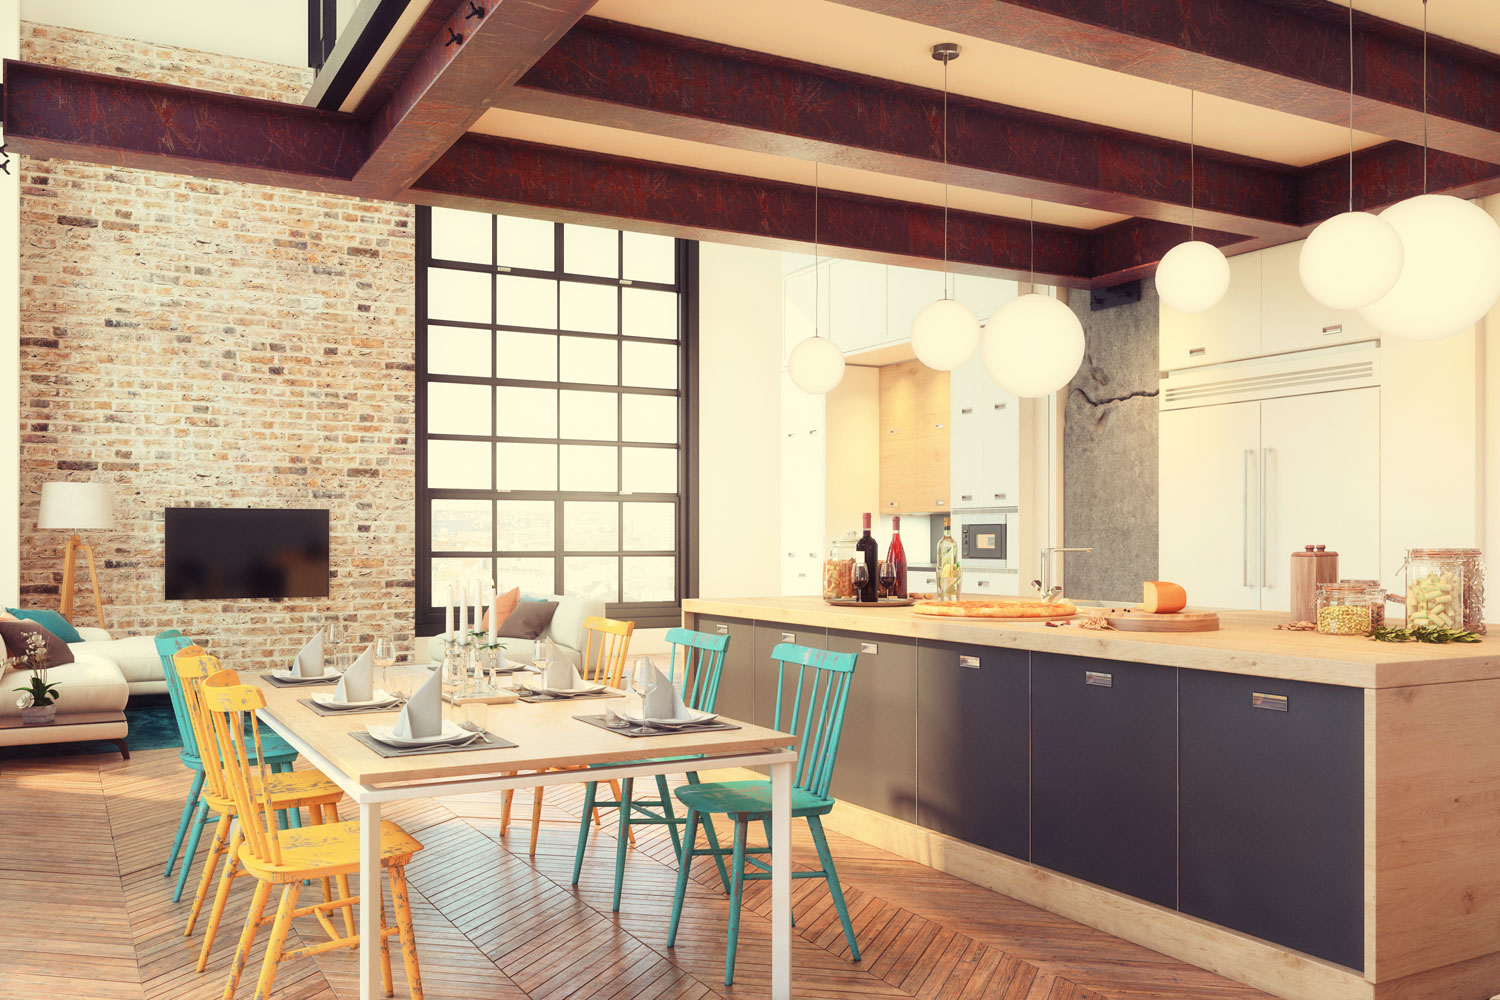 Gorgeous rustic and bright modern kitchen and dining area